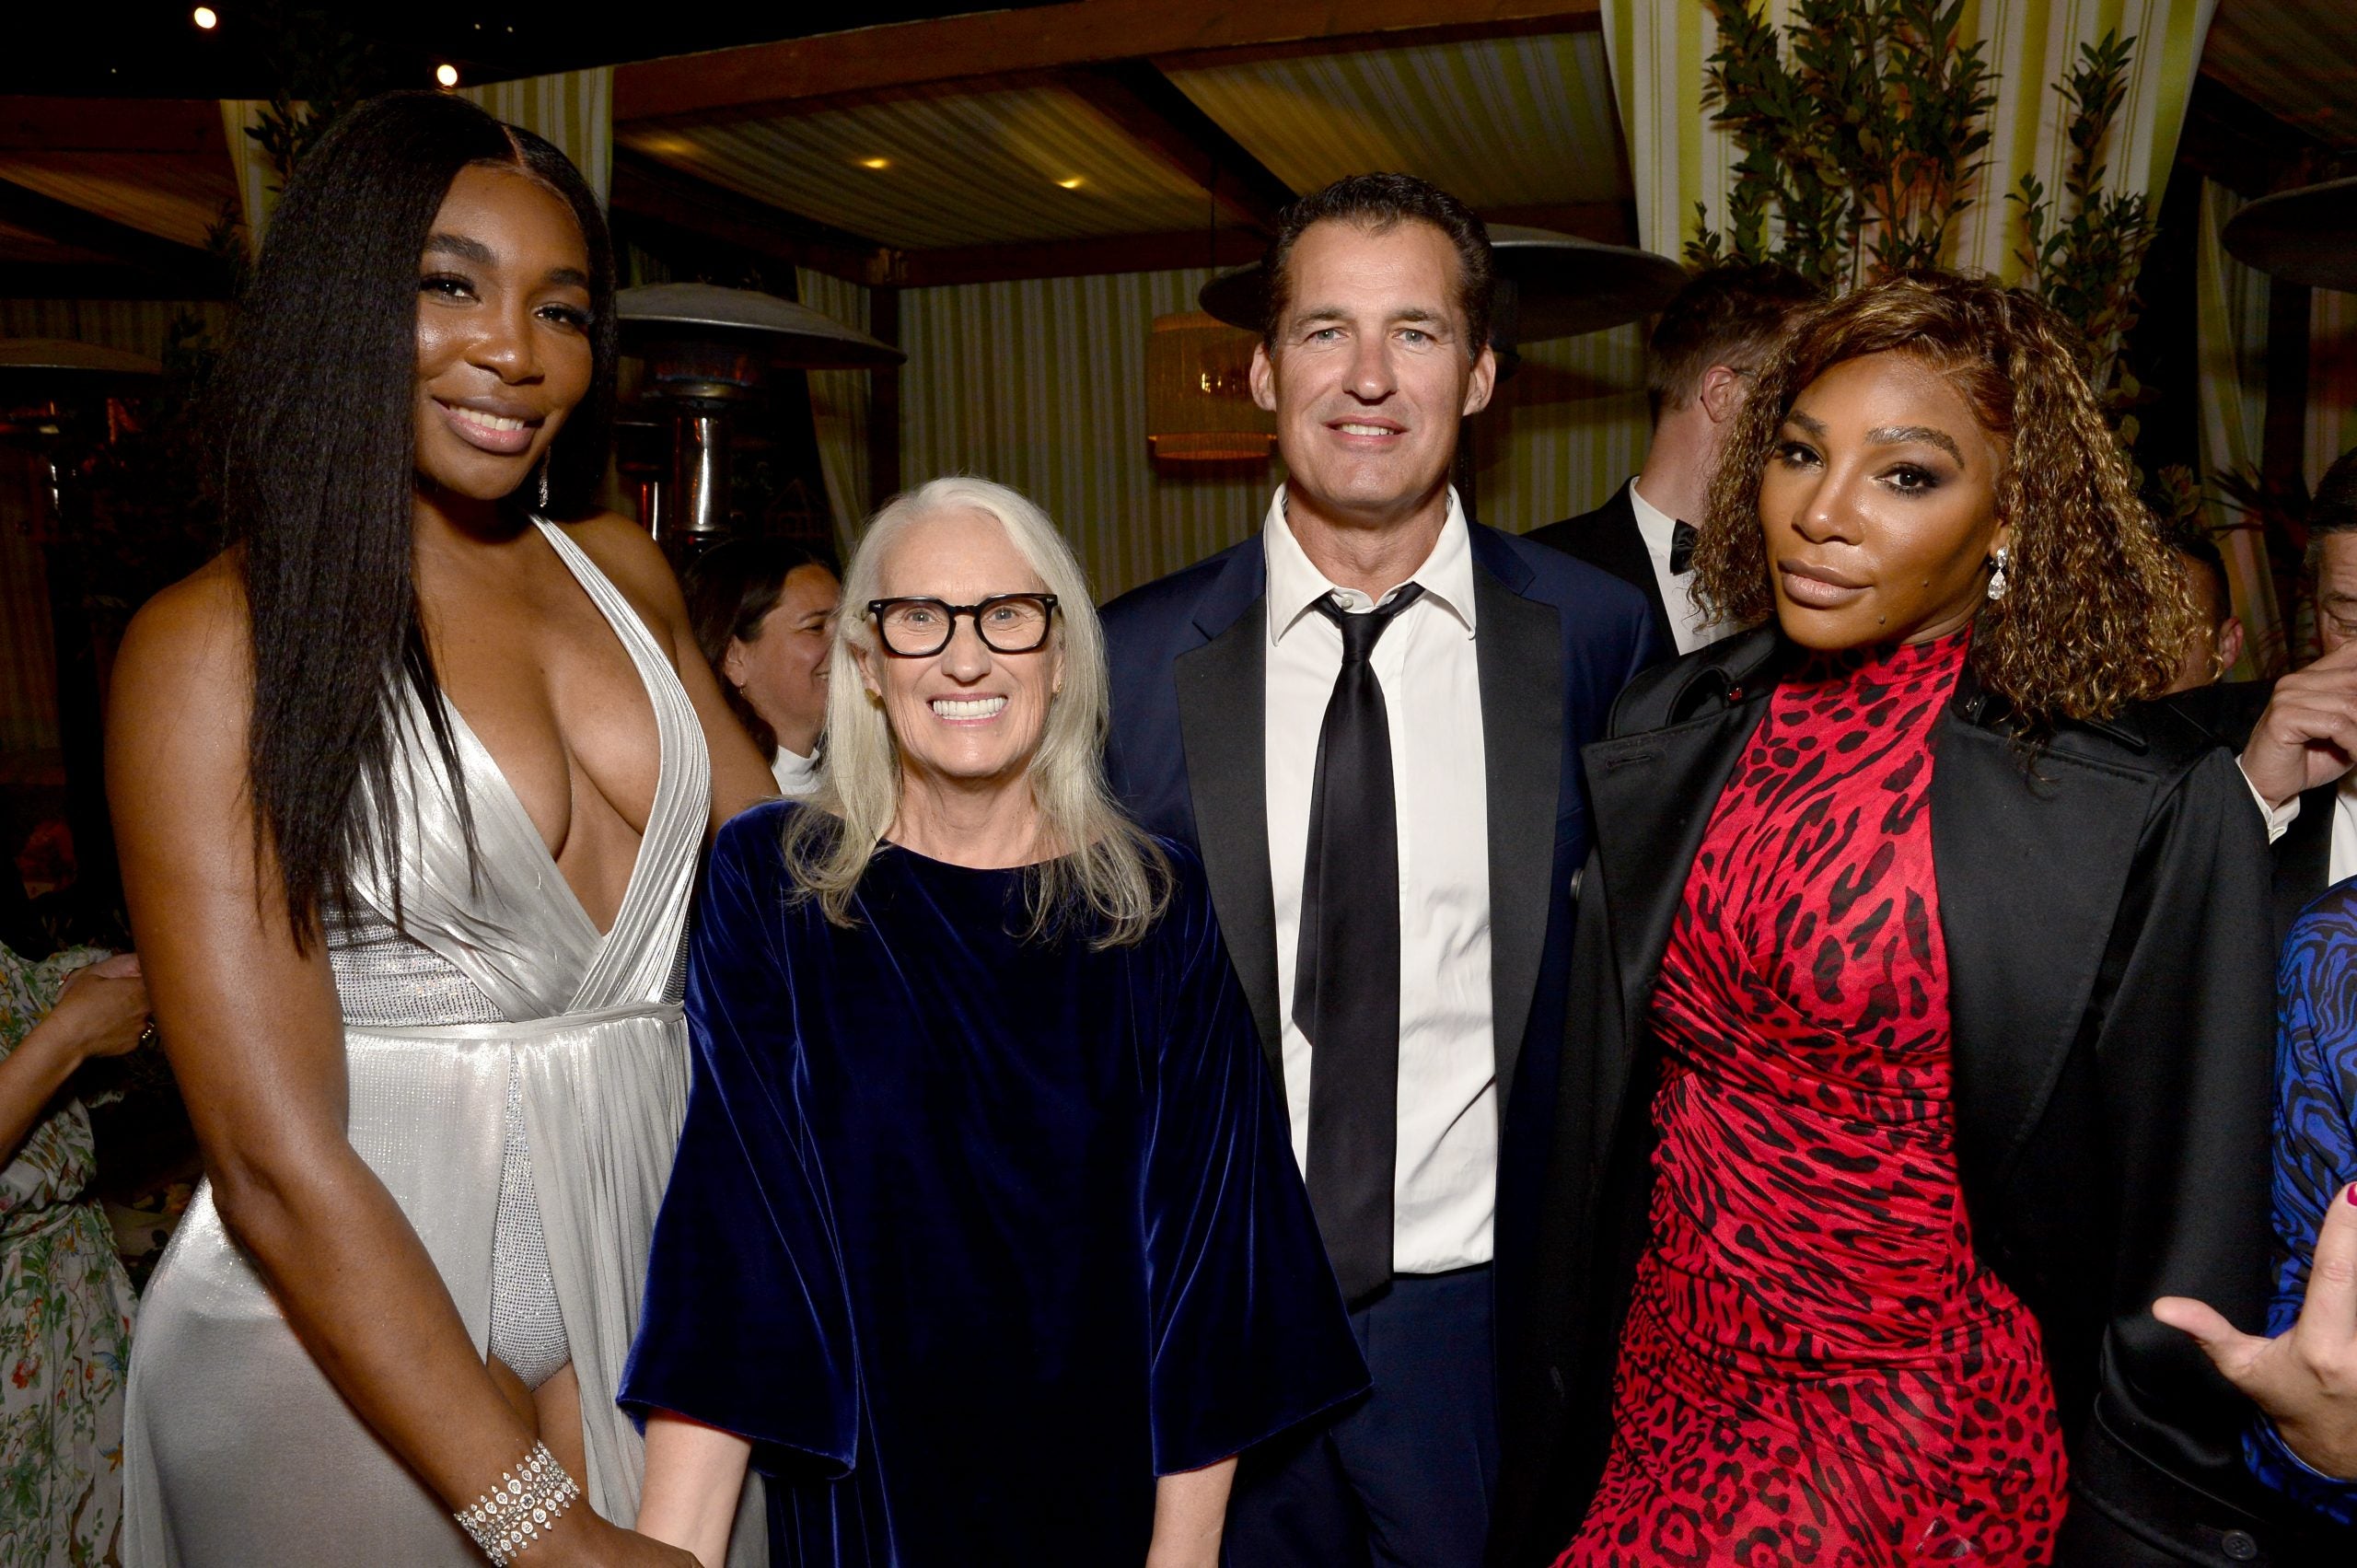 Director Apologizes For Diminishing Venus & Serena Williams During Acceptance Speech